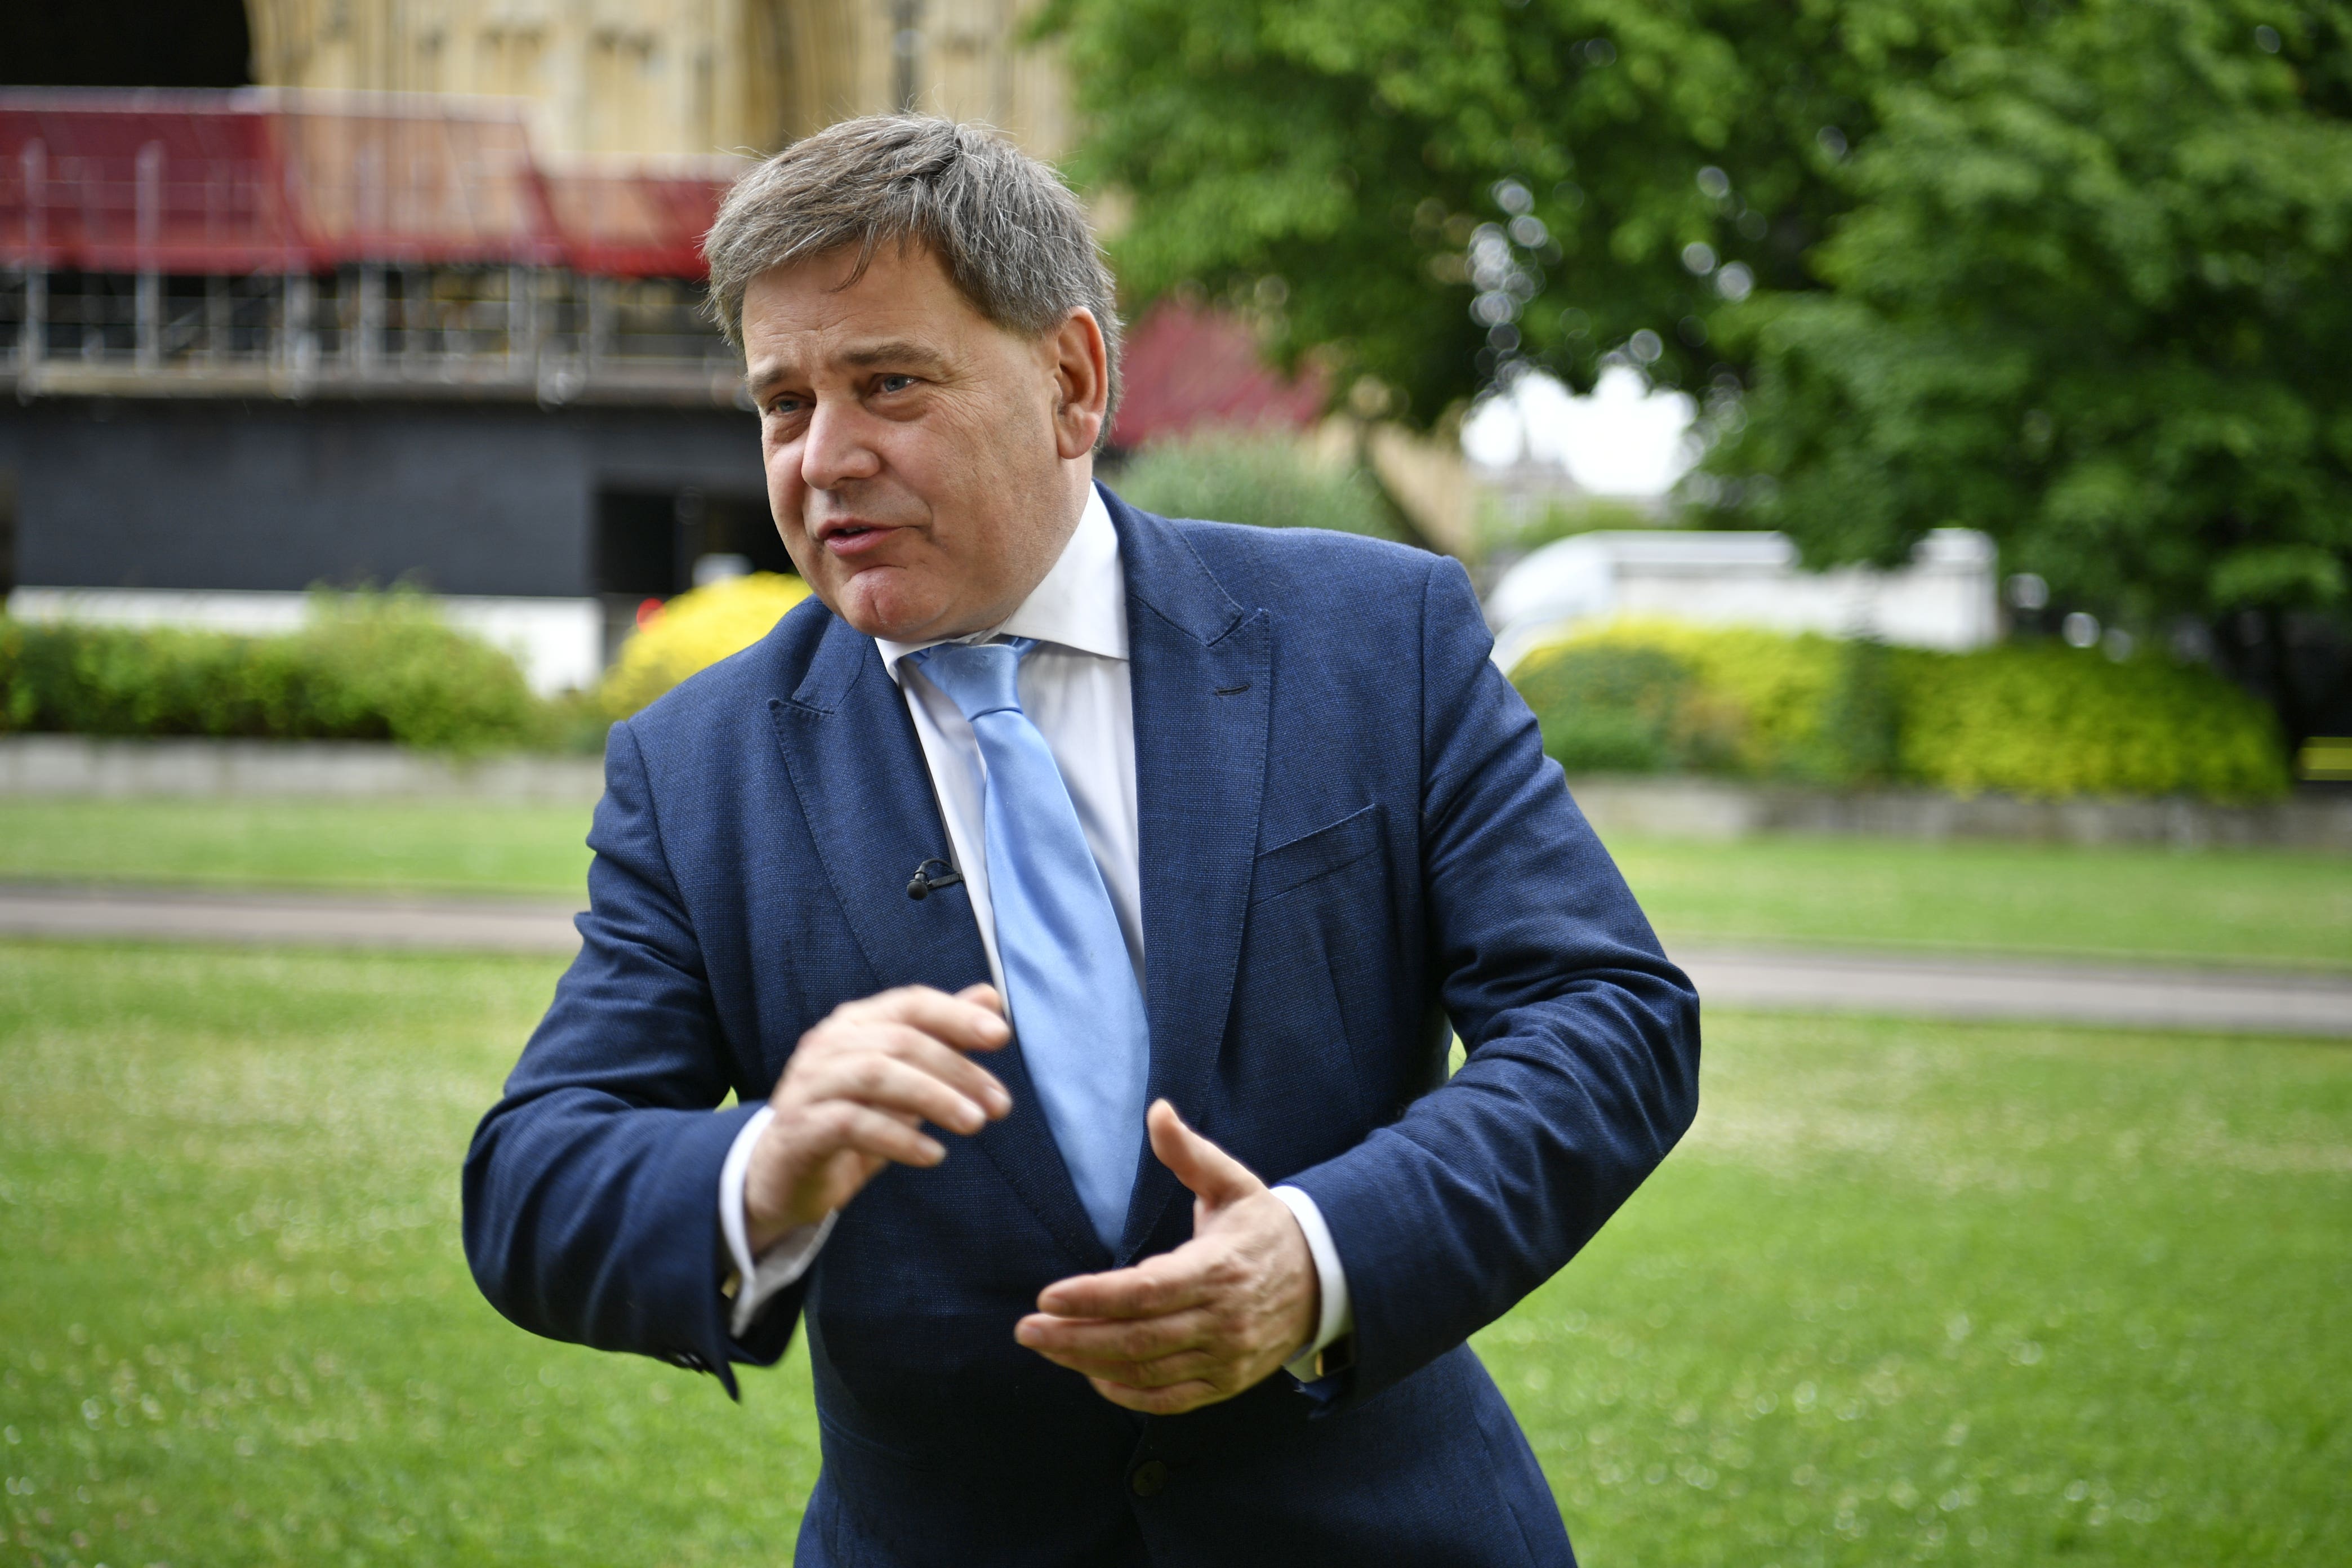 MP Andrew Bridgen has been expelled from the Conservative Party after comparing Covid-19 vaccines to the Holocaust and being found to have breached lobbying rules (Beresford Hodge/PA)